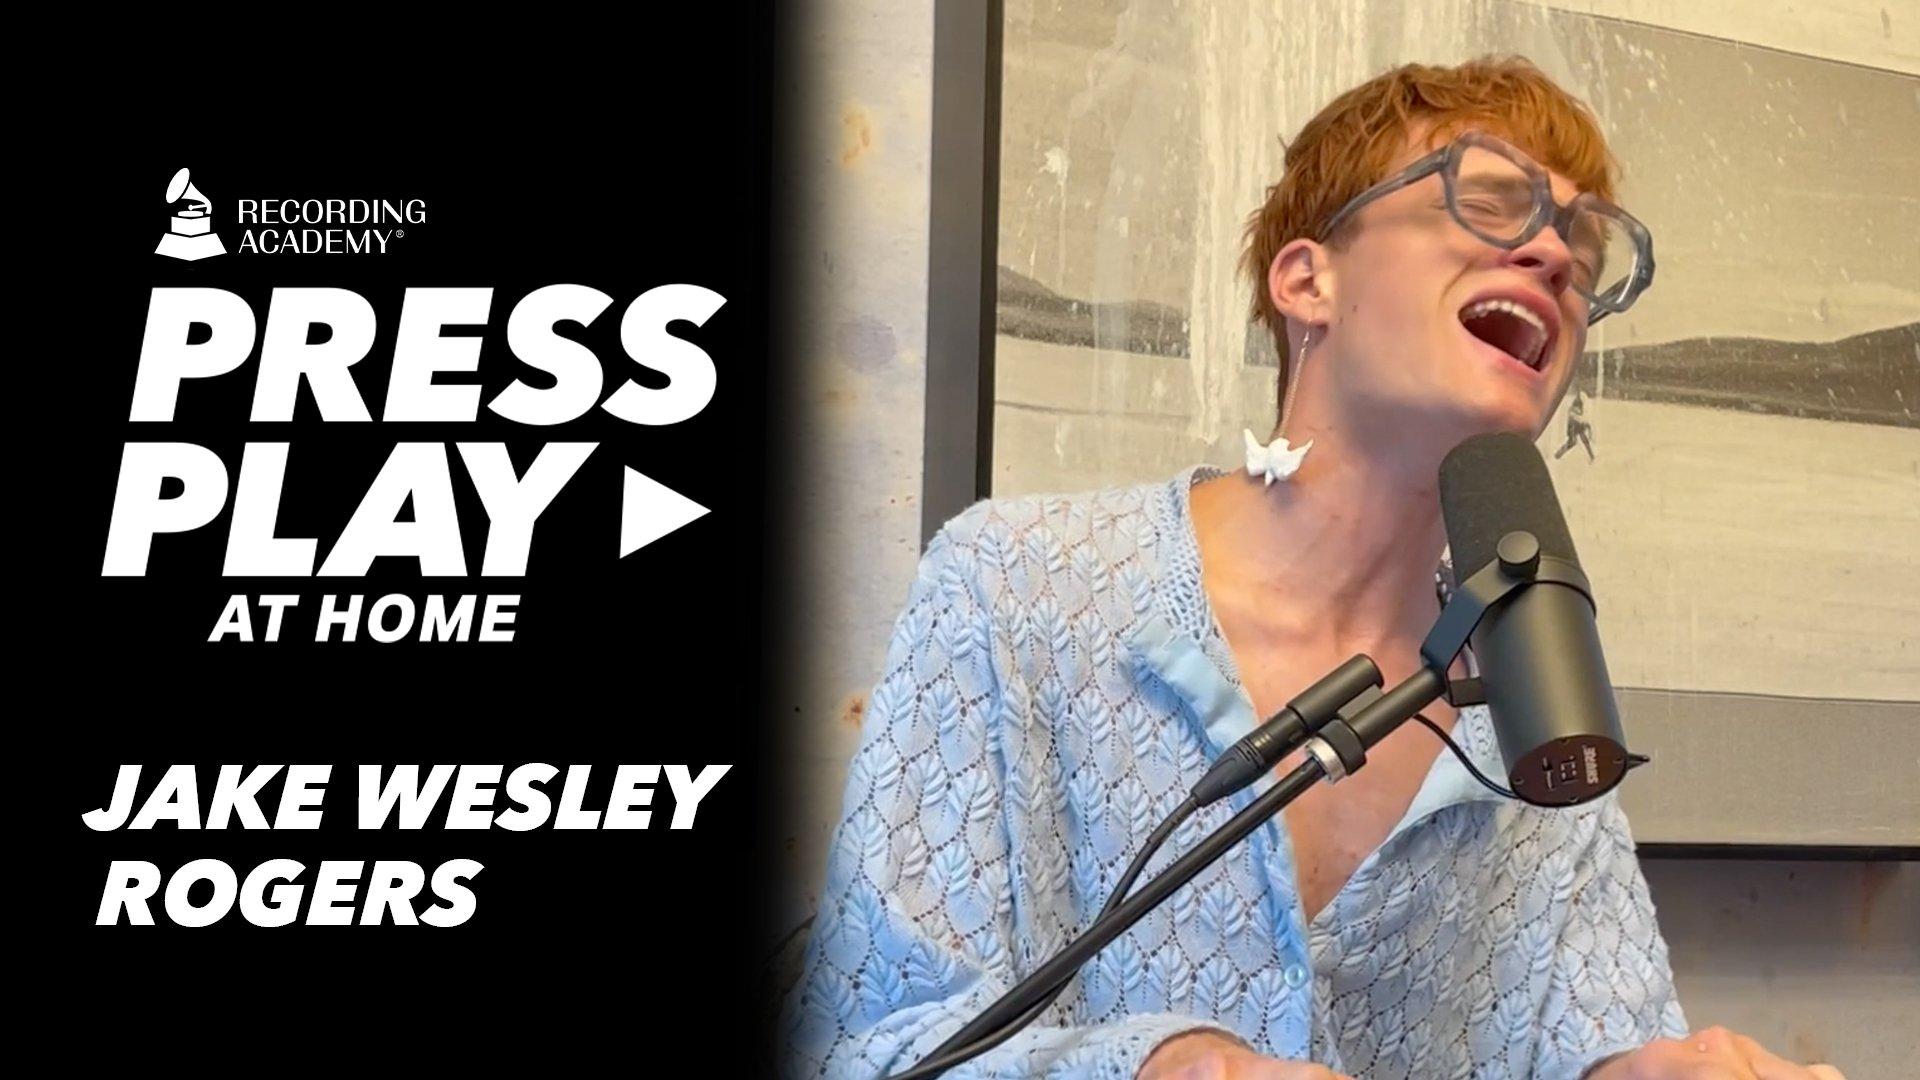 Jake Wesley Rogers Performs "Middle Of Love"